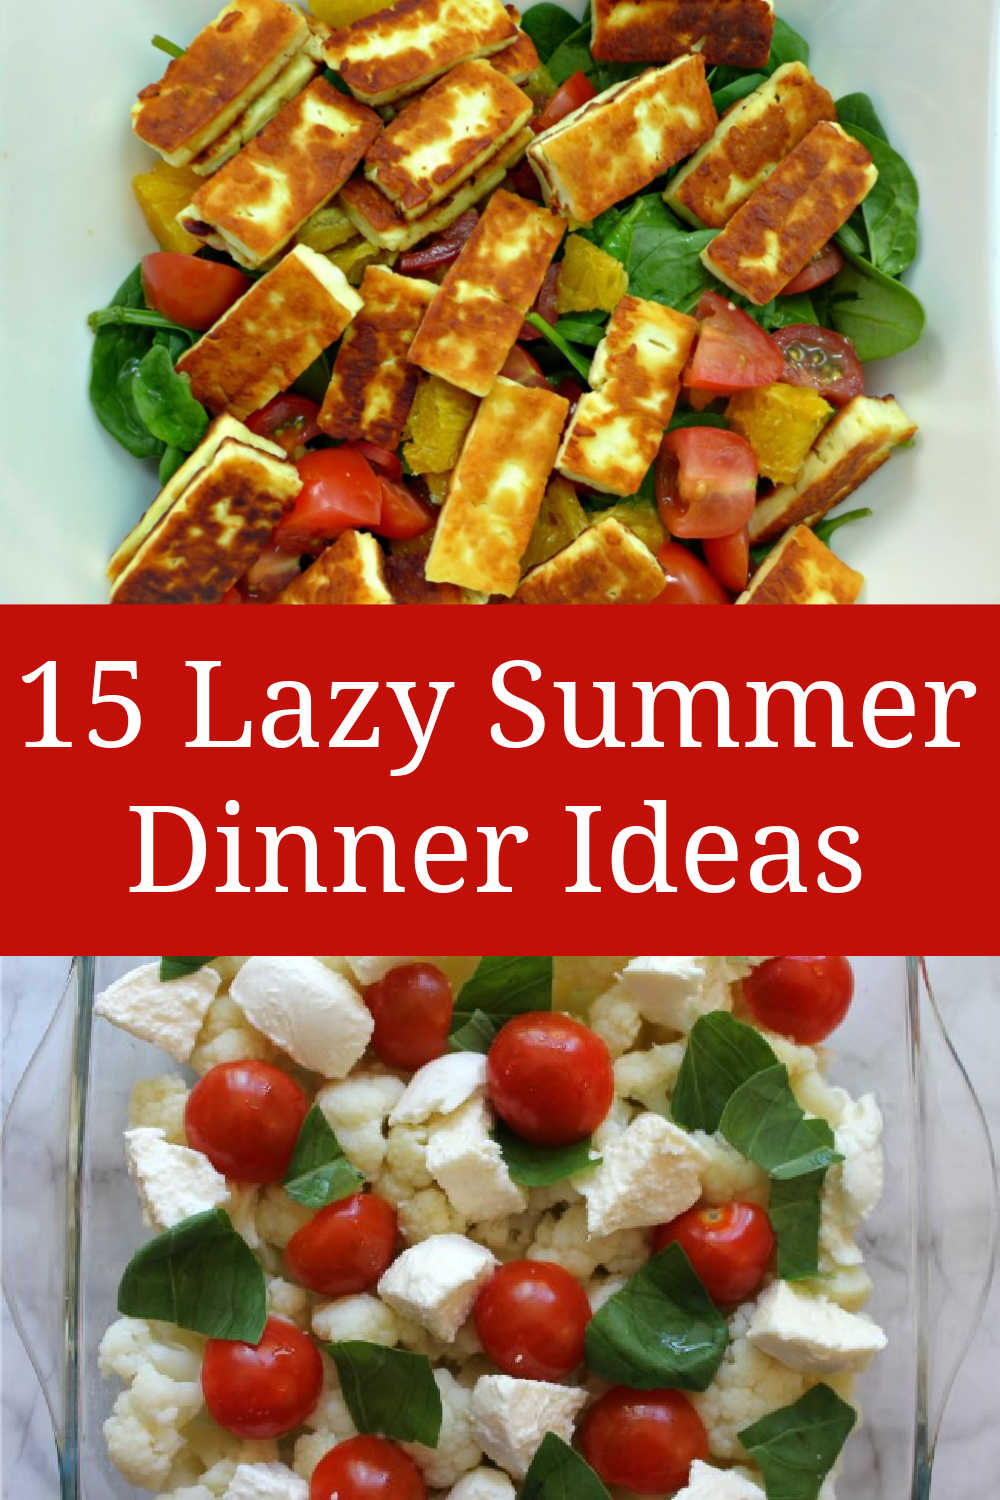 Lazy Summer Dinner Ideas - 15 Easy recipes for quick dinners you can make on warm evenings to keep cool.